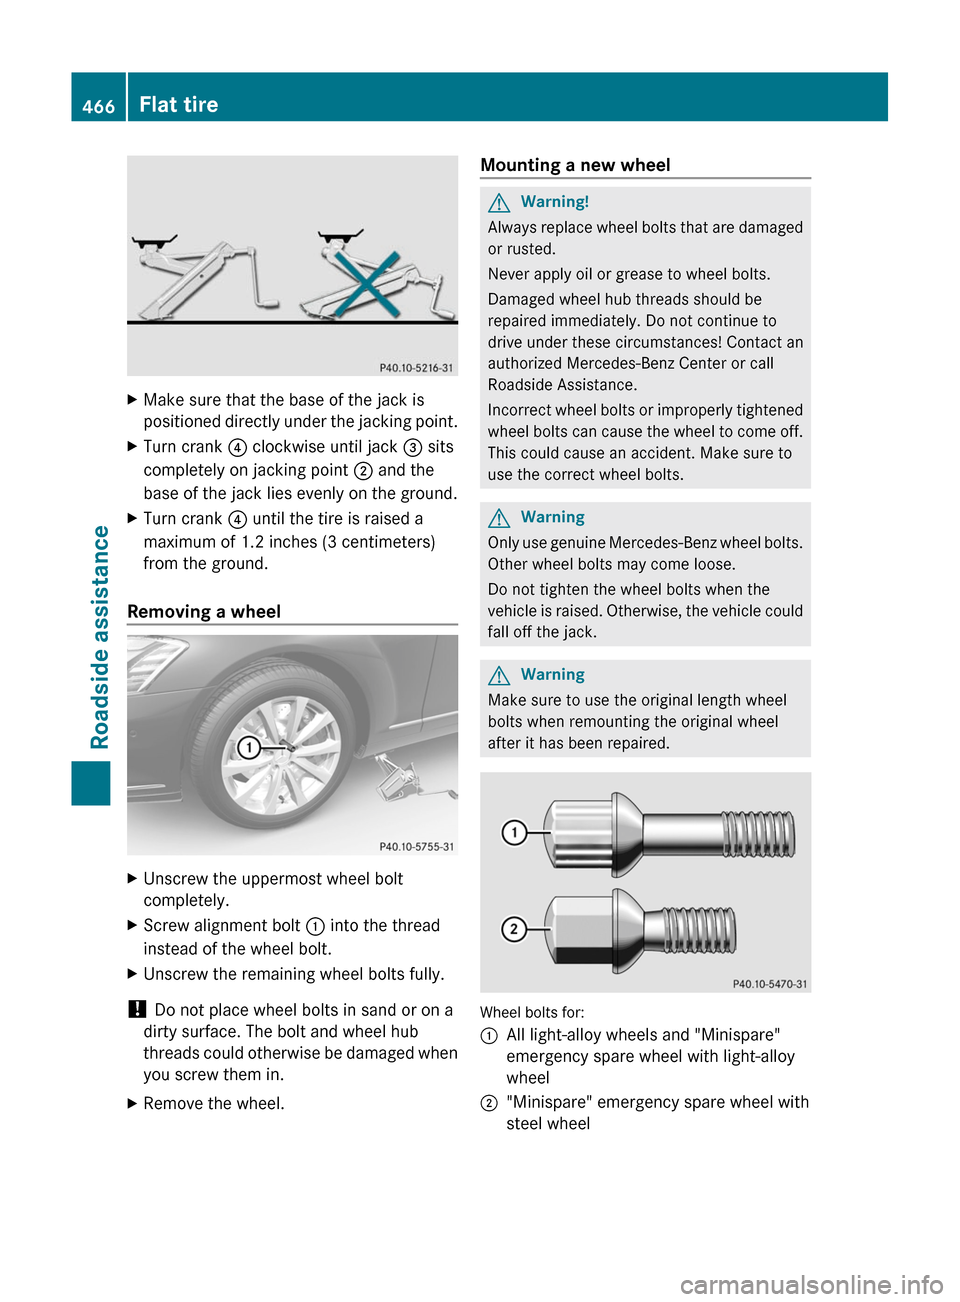 MERCEDES-BENZ S-Class 2011 W221 Owners Manual XMake sure that the base of the jack is
positioned directly under the jacking point.
XTurn crank ? clockwise until jack = sits
completely on jacking point ; and the
base of the jack lies evenly on the